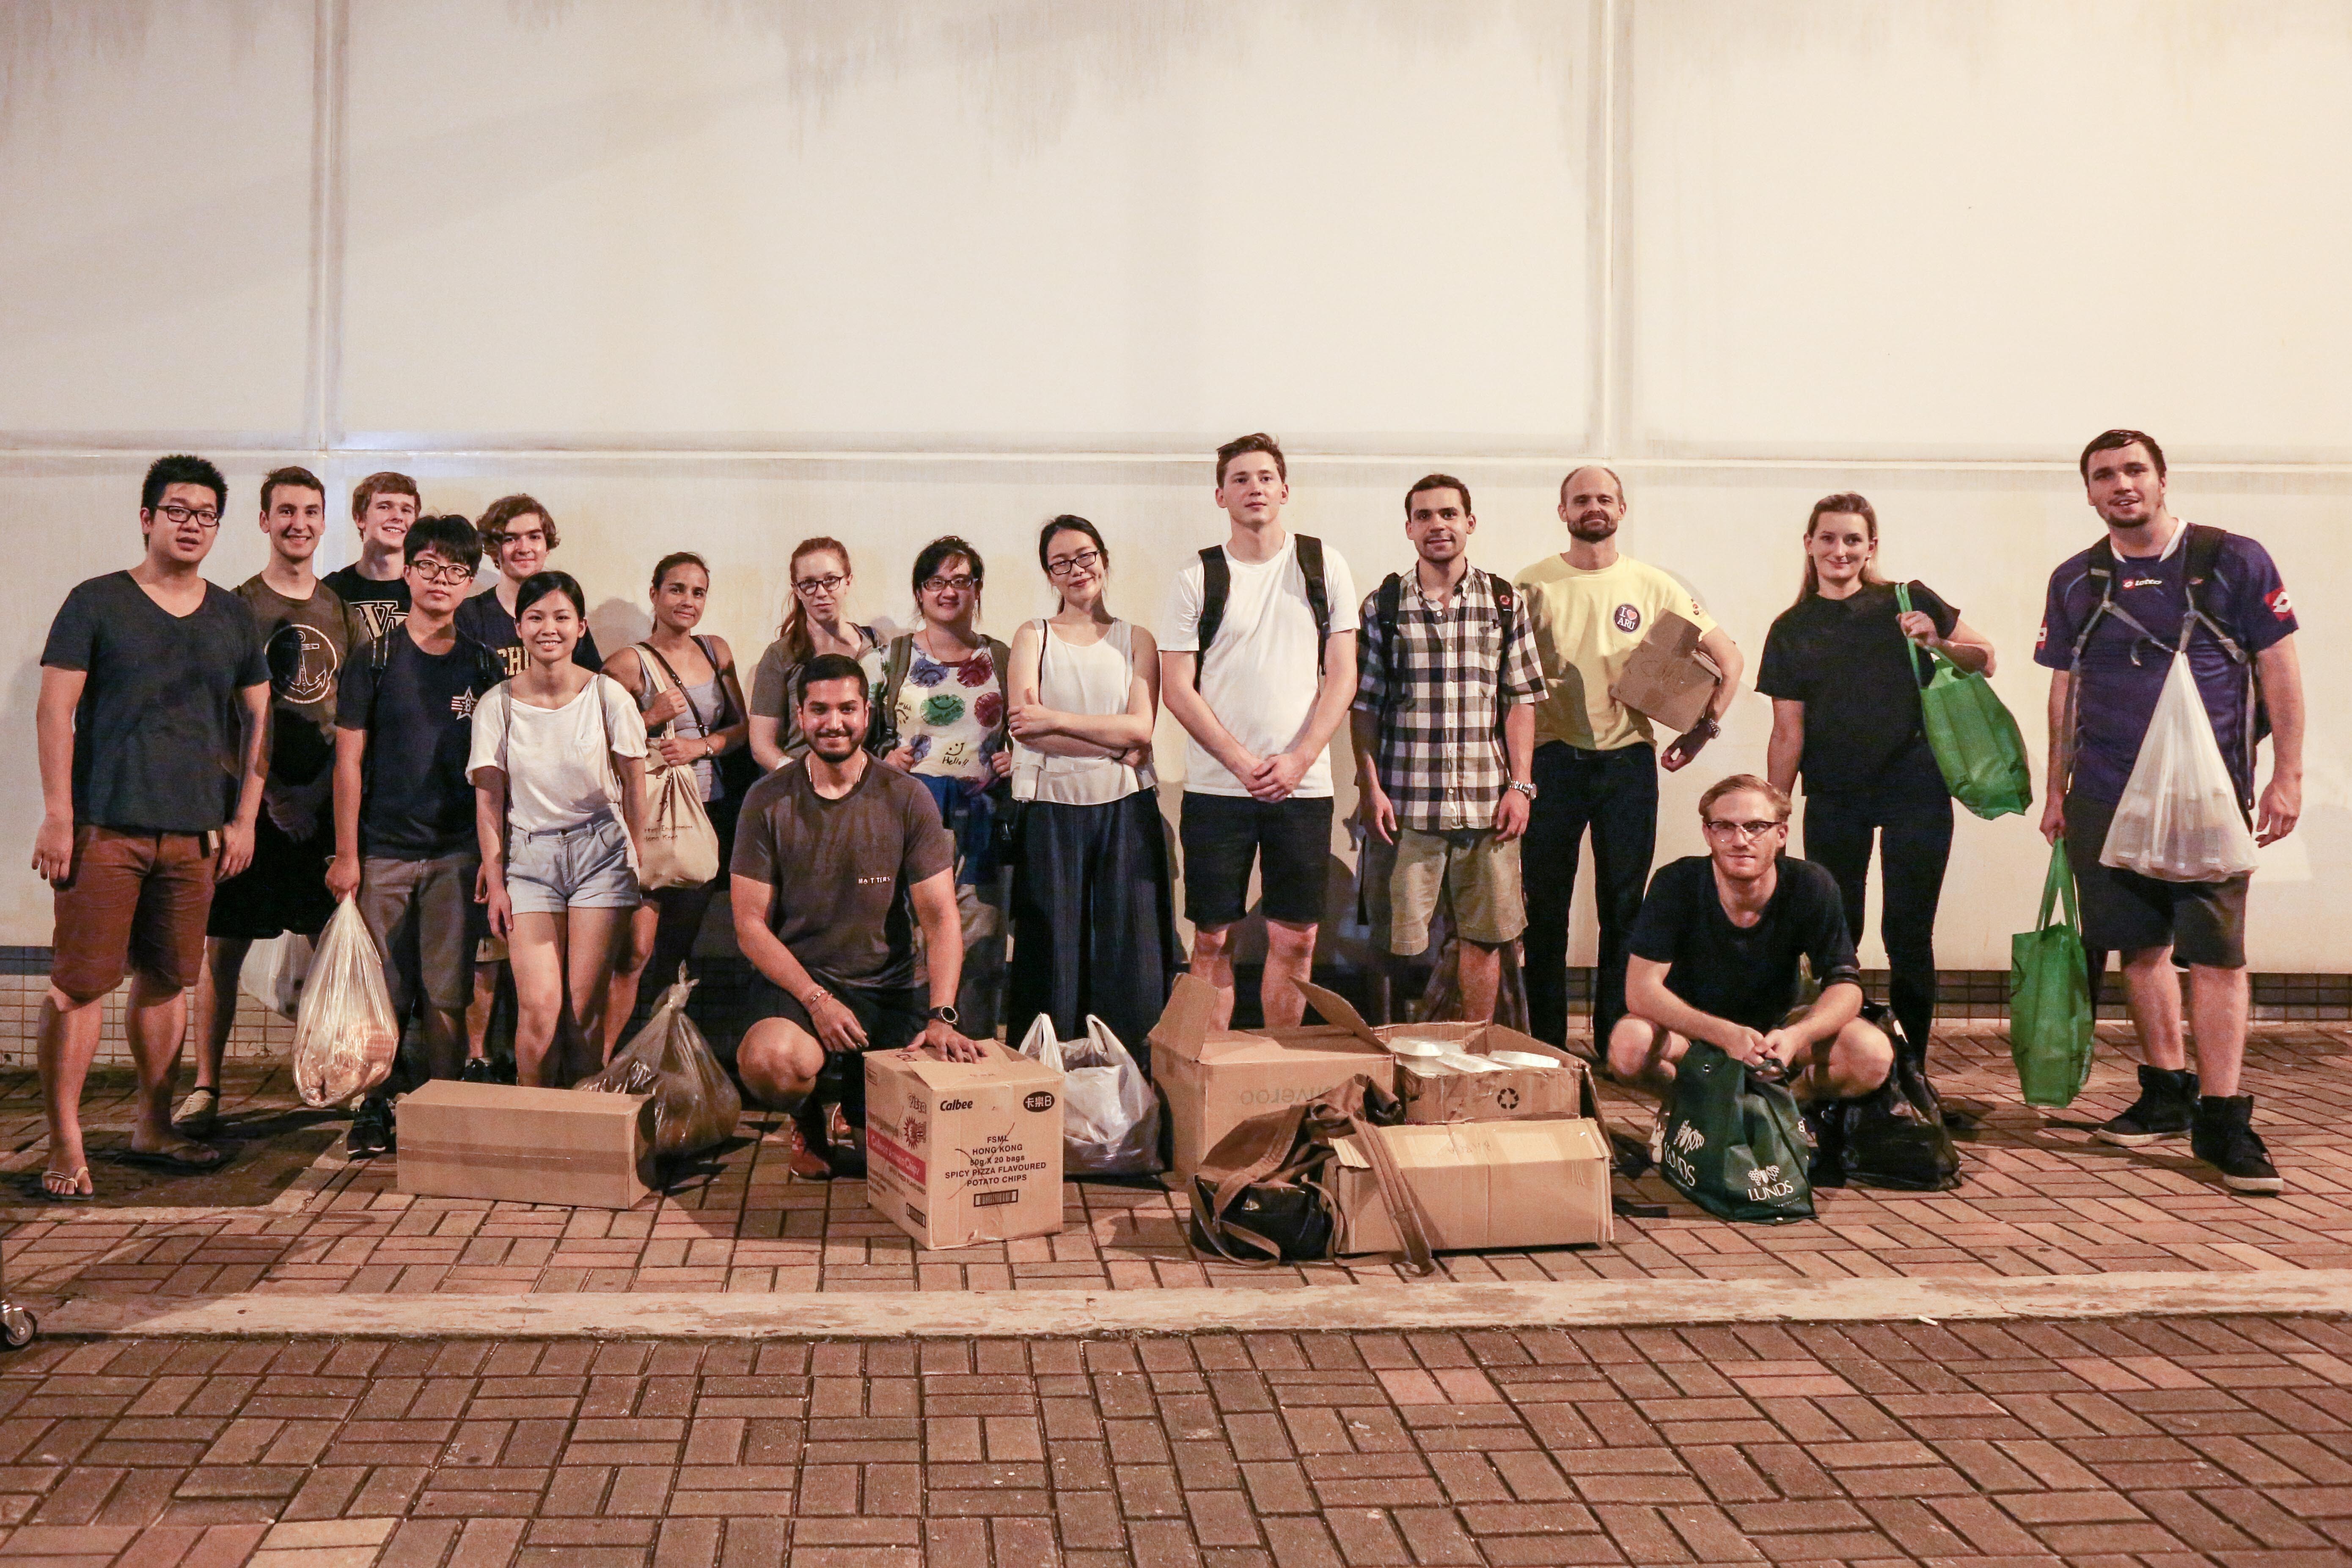 Volunteers from ImpactHK go on nightly walks to offer supplies and shelter to Hong Kong’s homeless population. Photo: ImpactHK/Jeff Rotmeyer